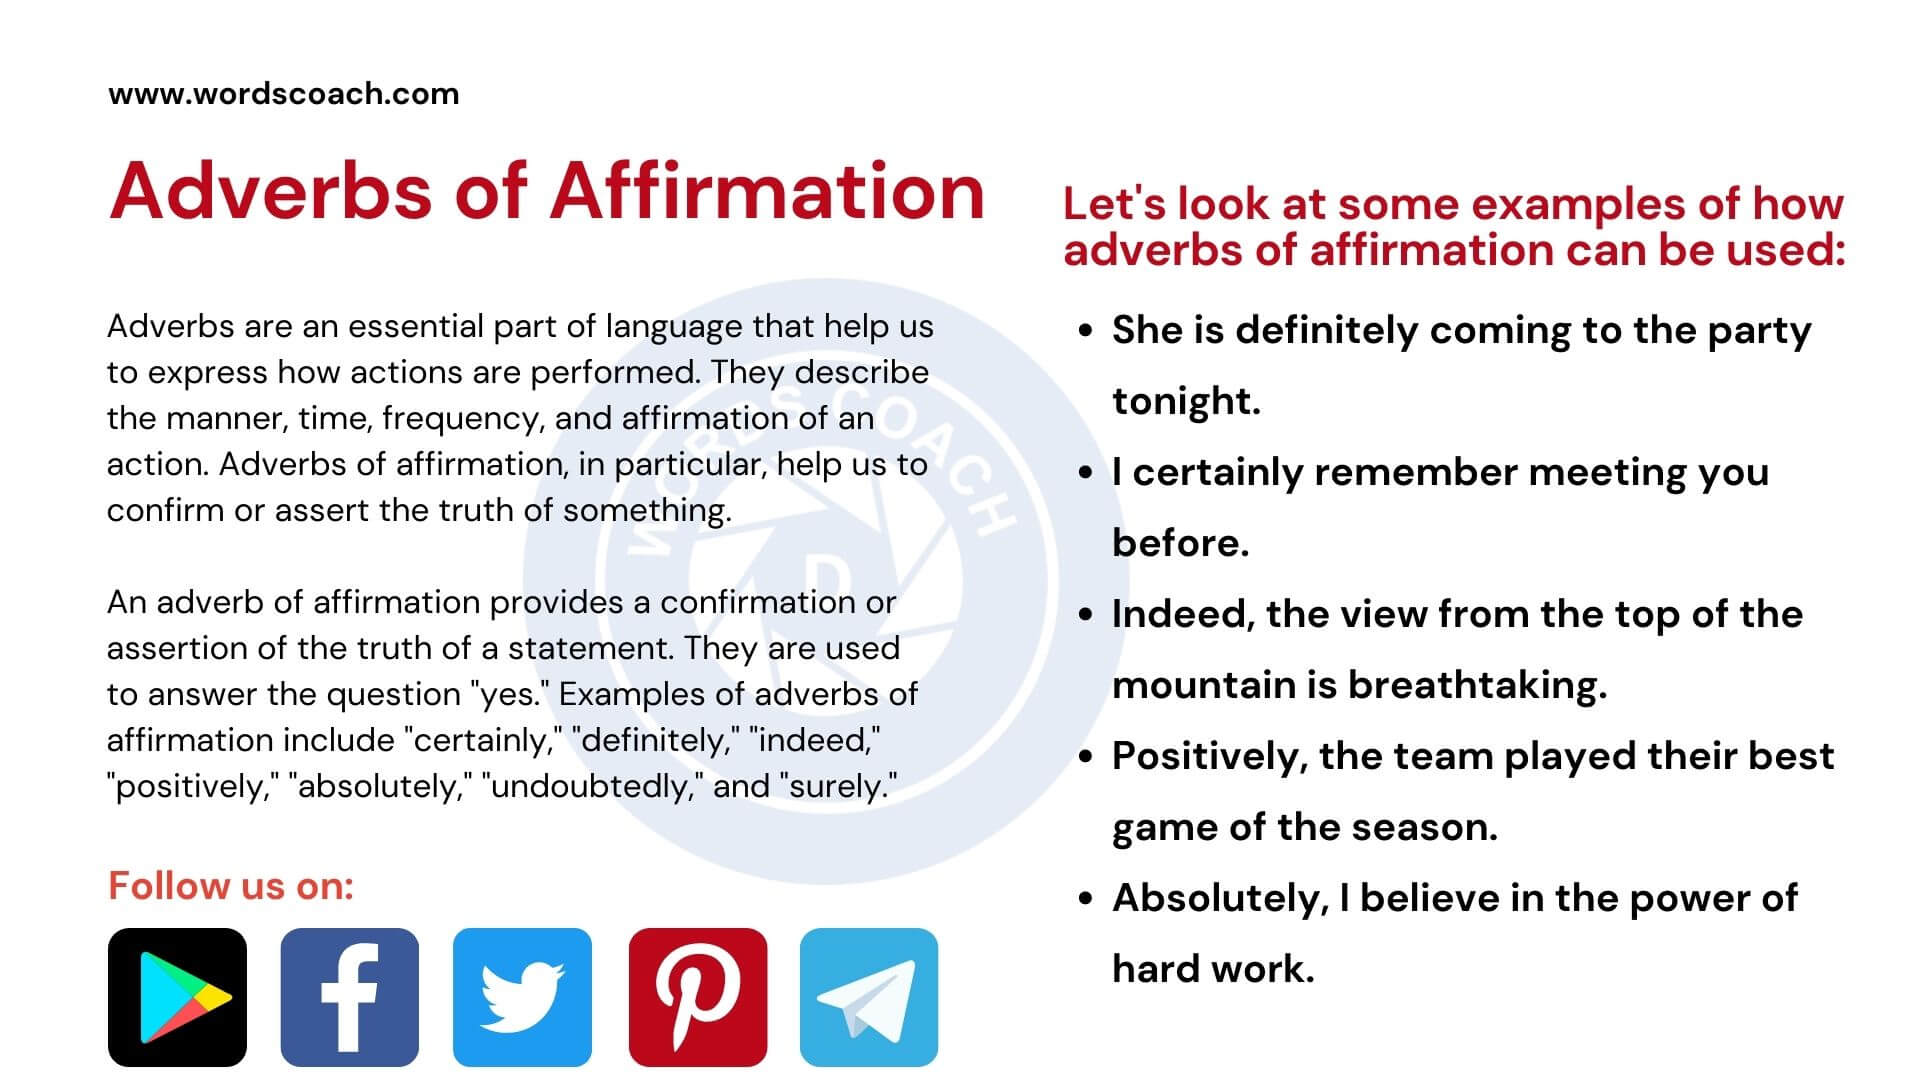 adverbs-of-affirmation-word-coach